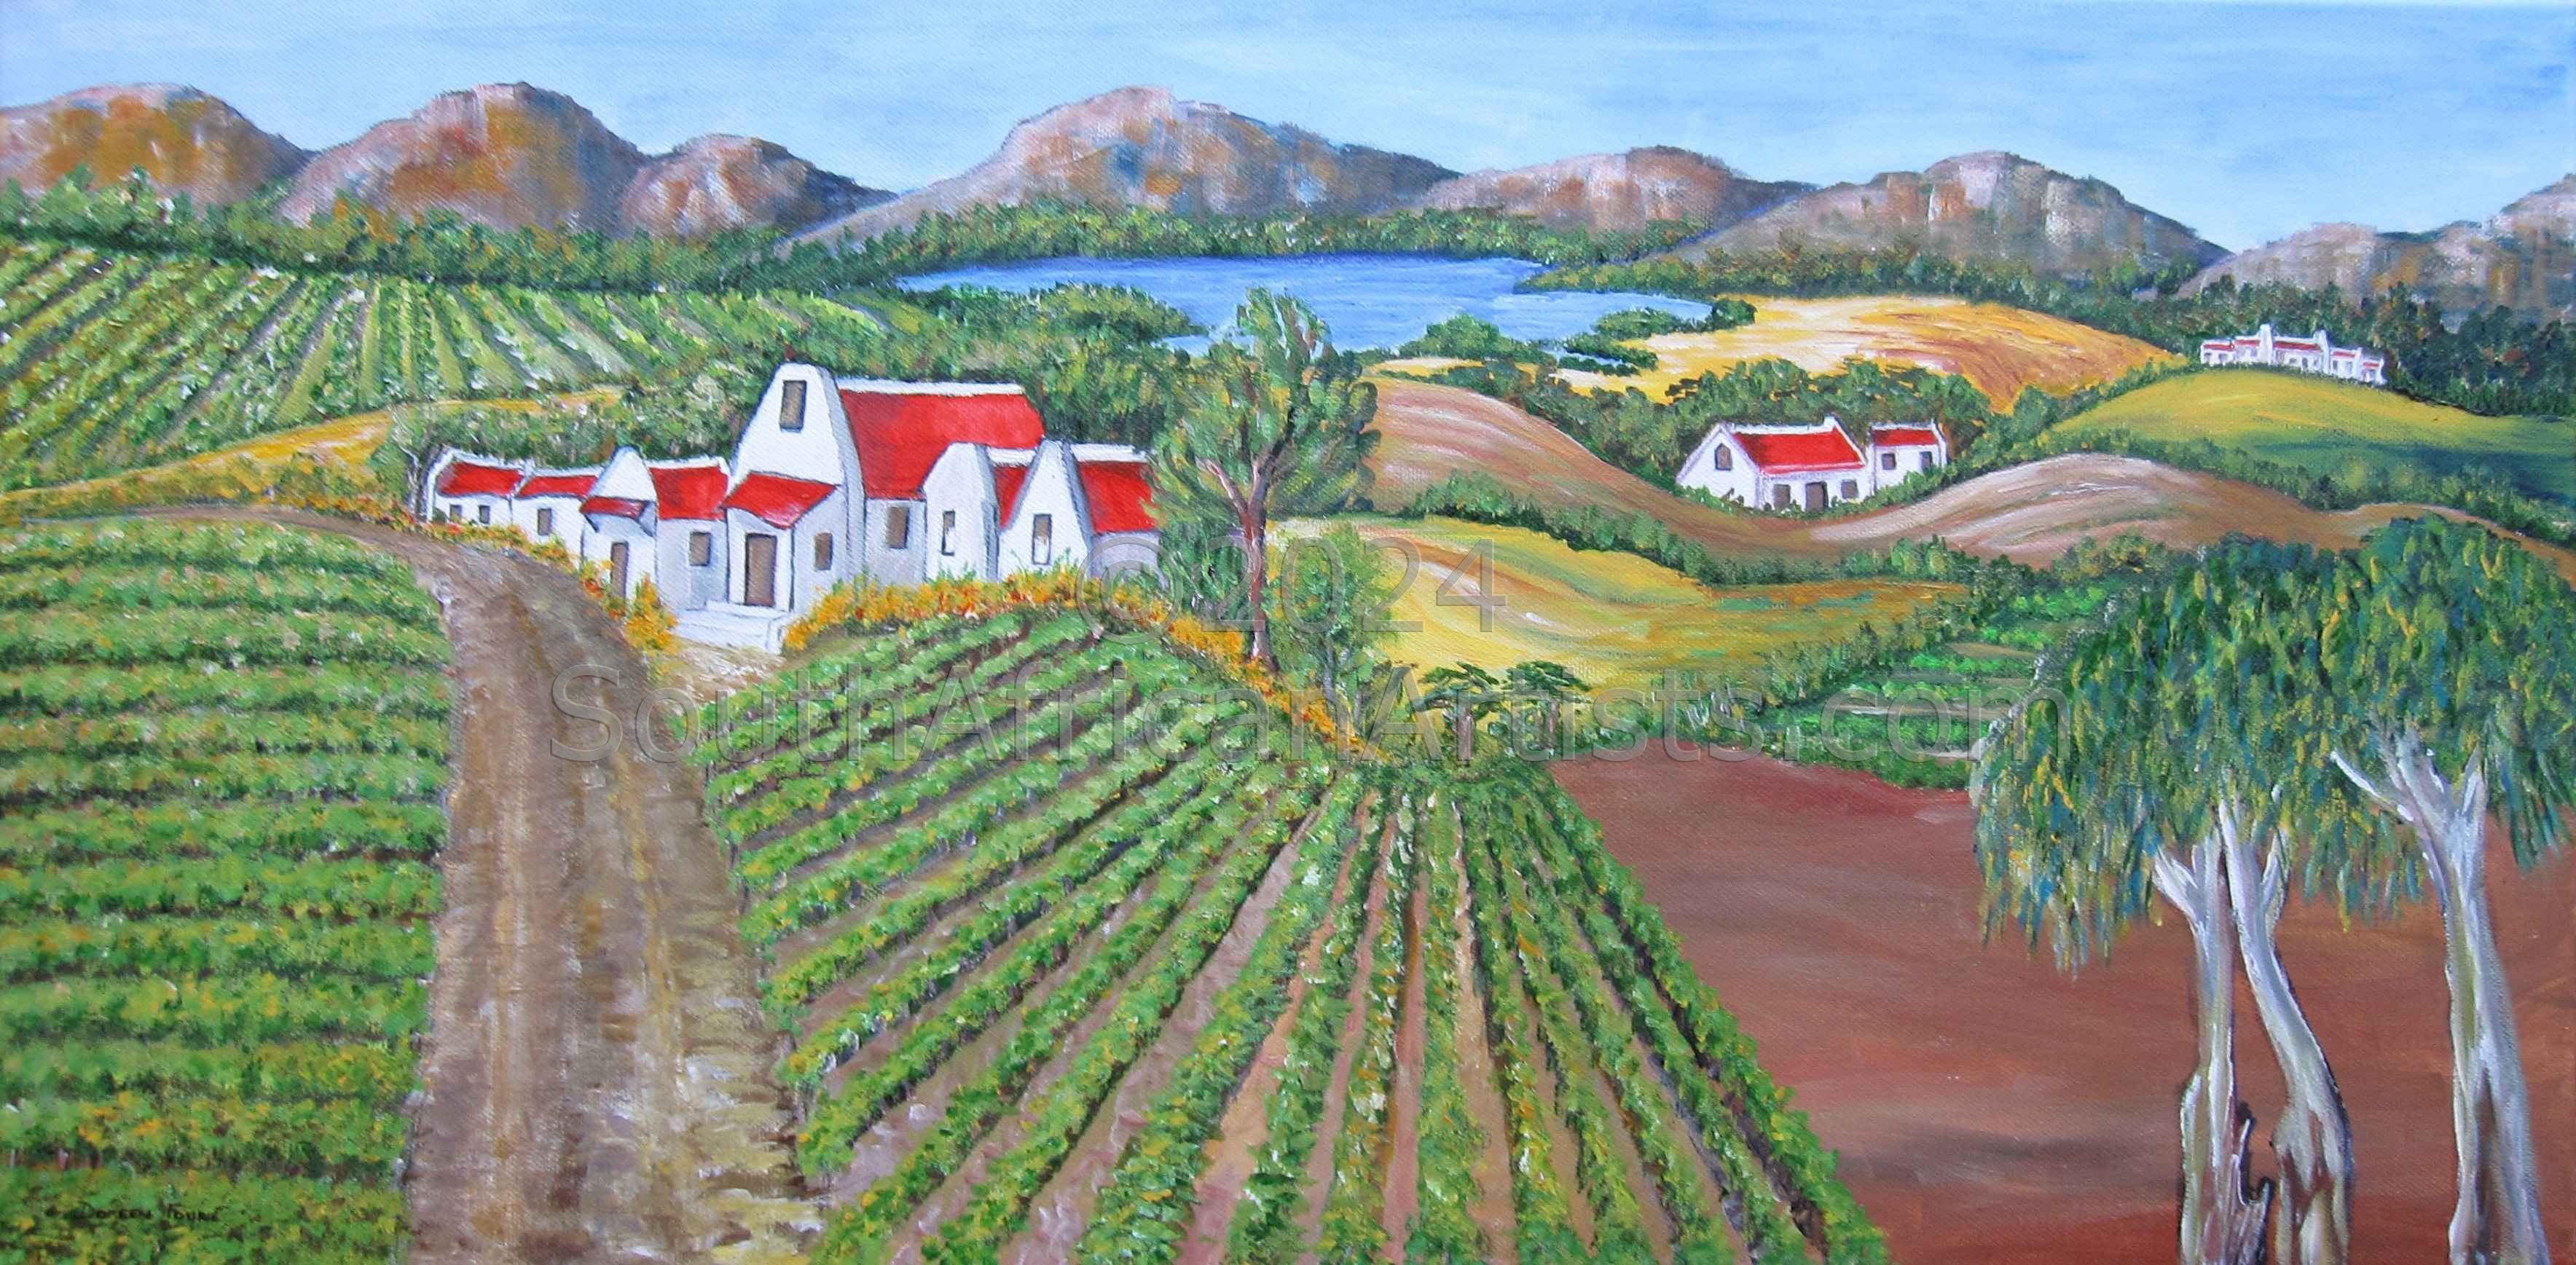 Vineyards in the Boland